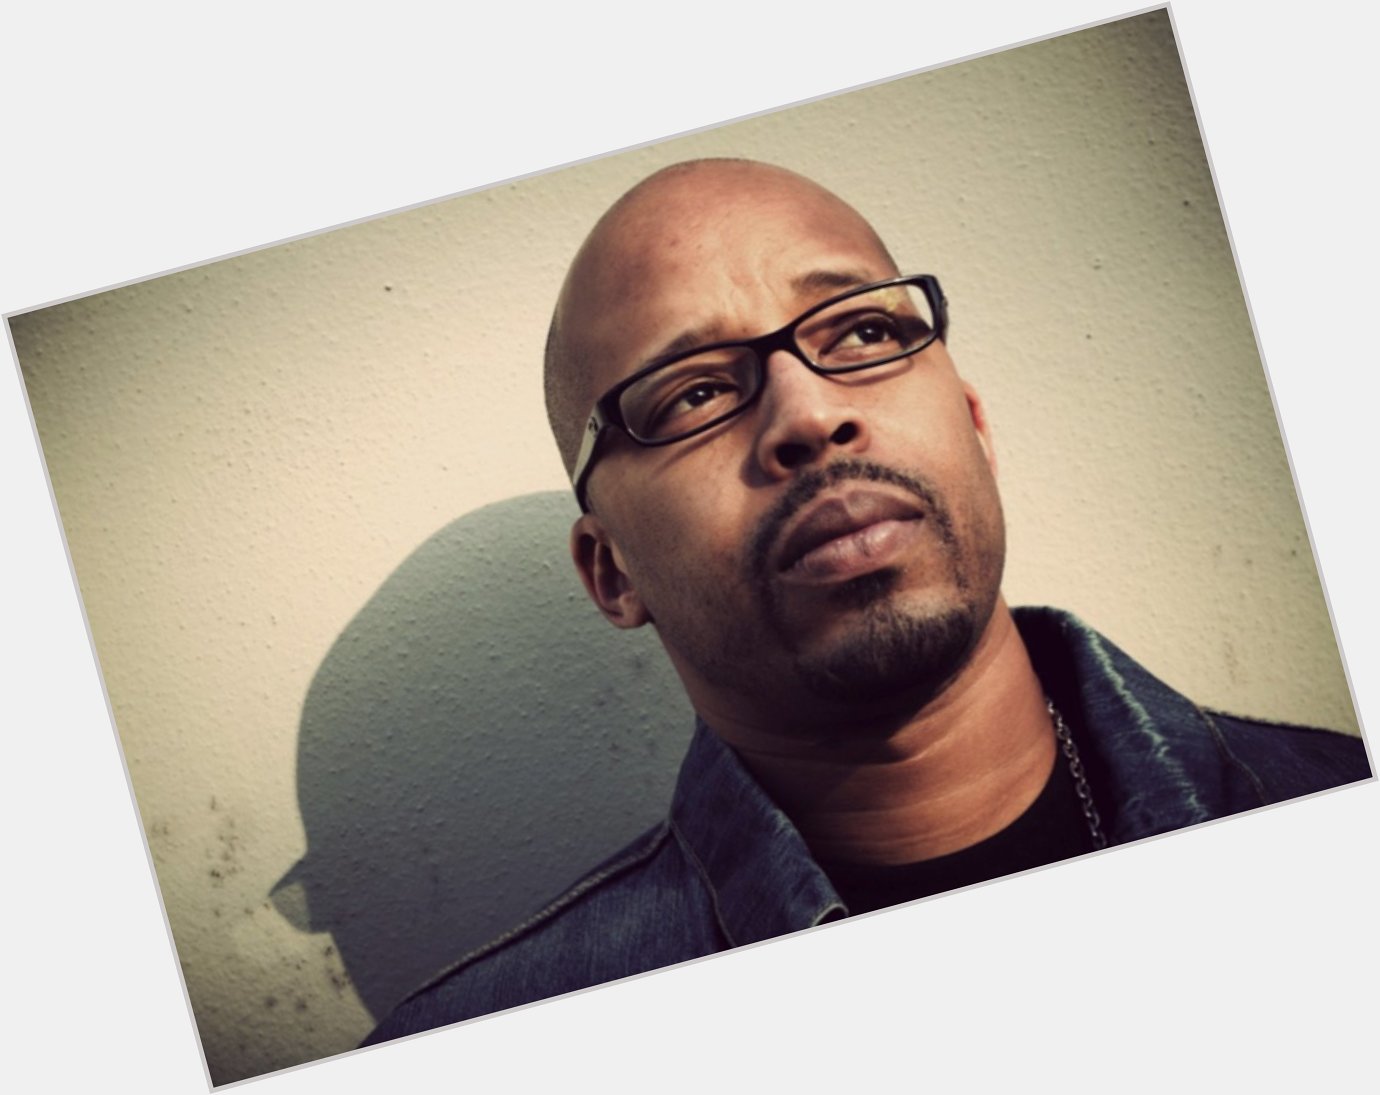 Happy birthday to the one and only Warren G! 